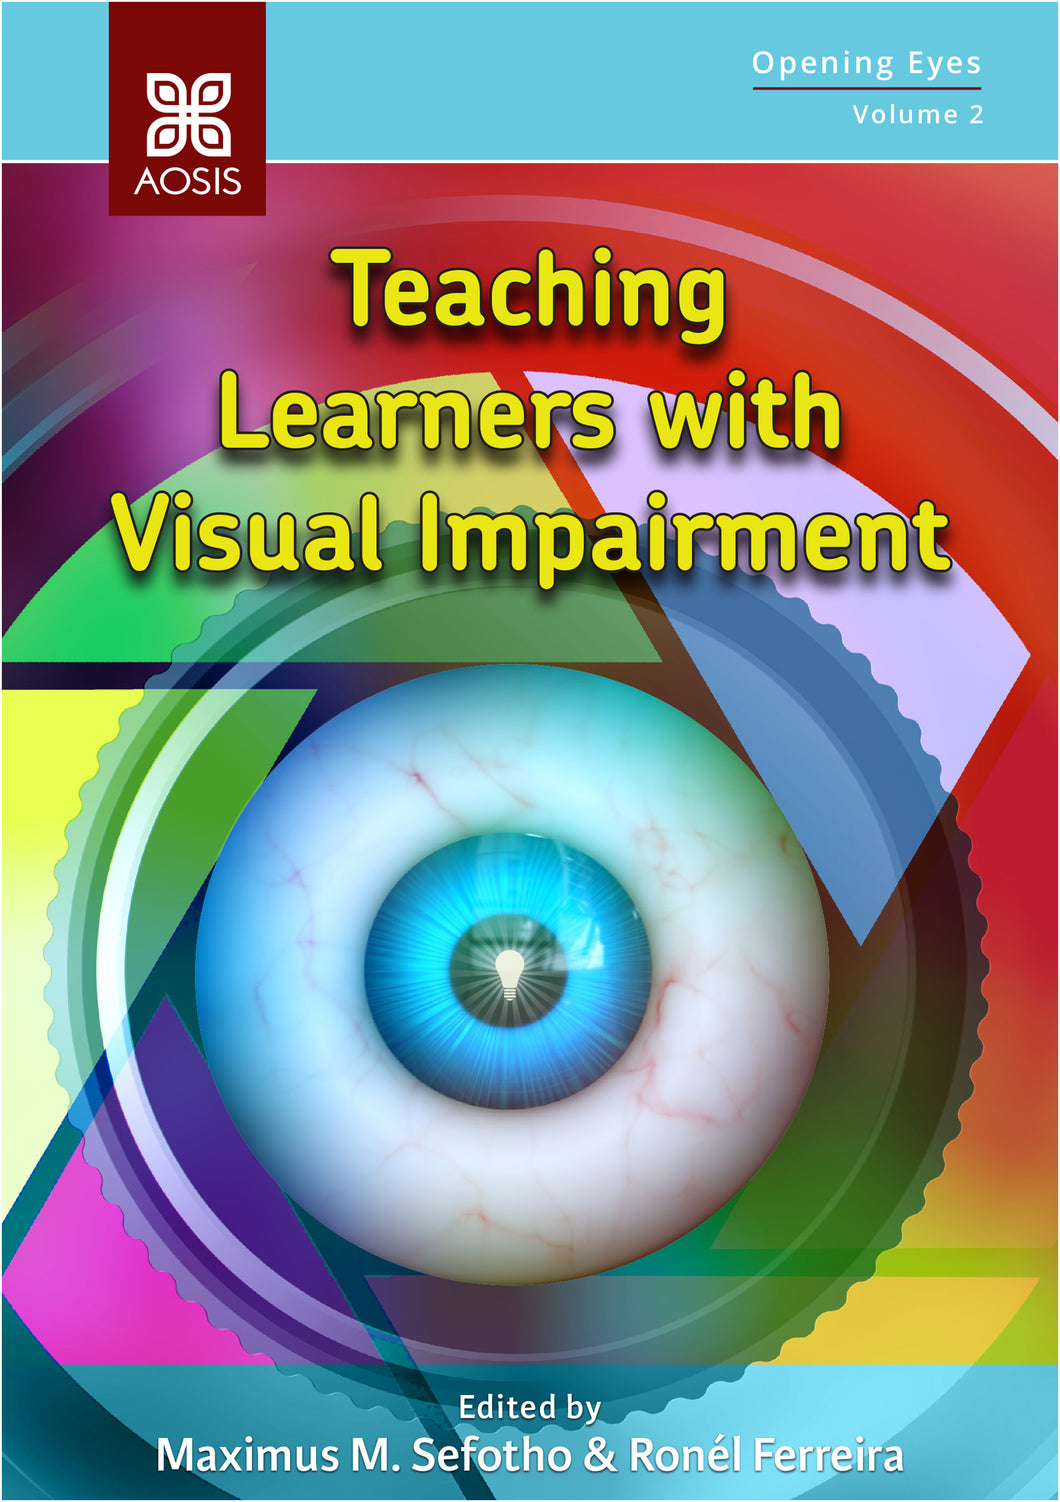 Teaching Learners with Visual Impairment (Print copy)